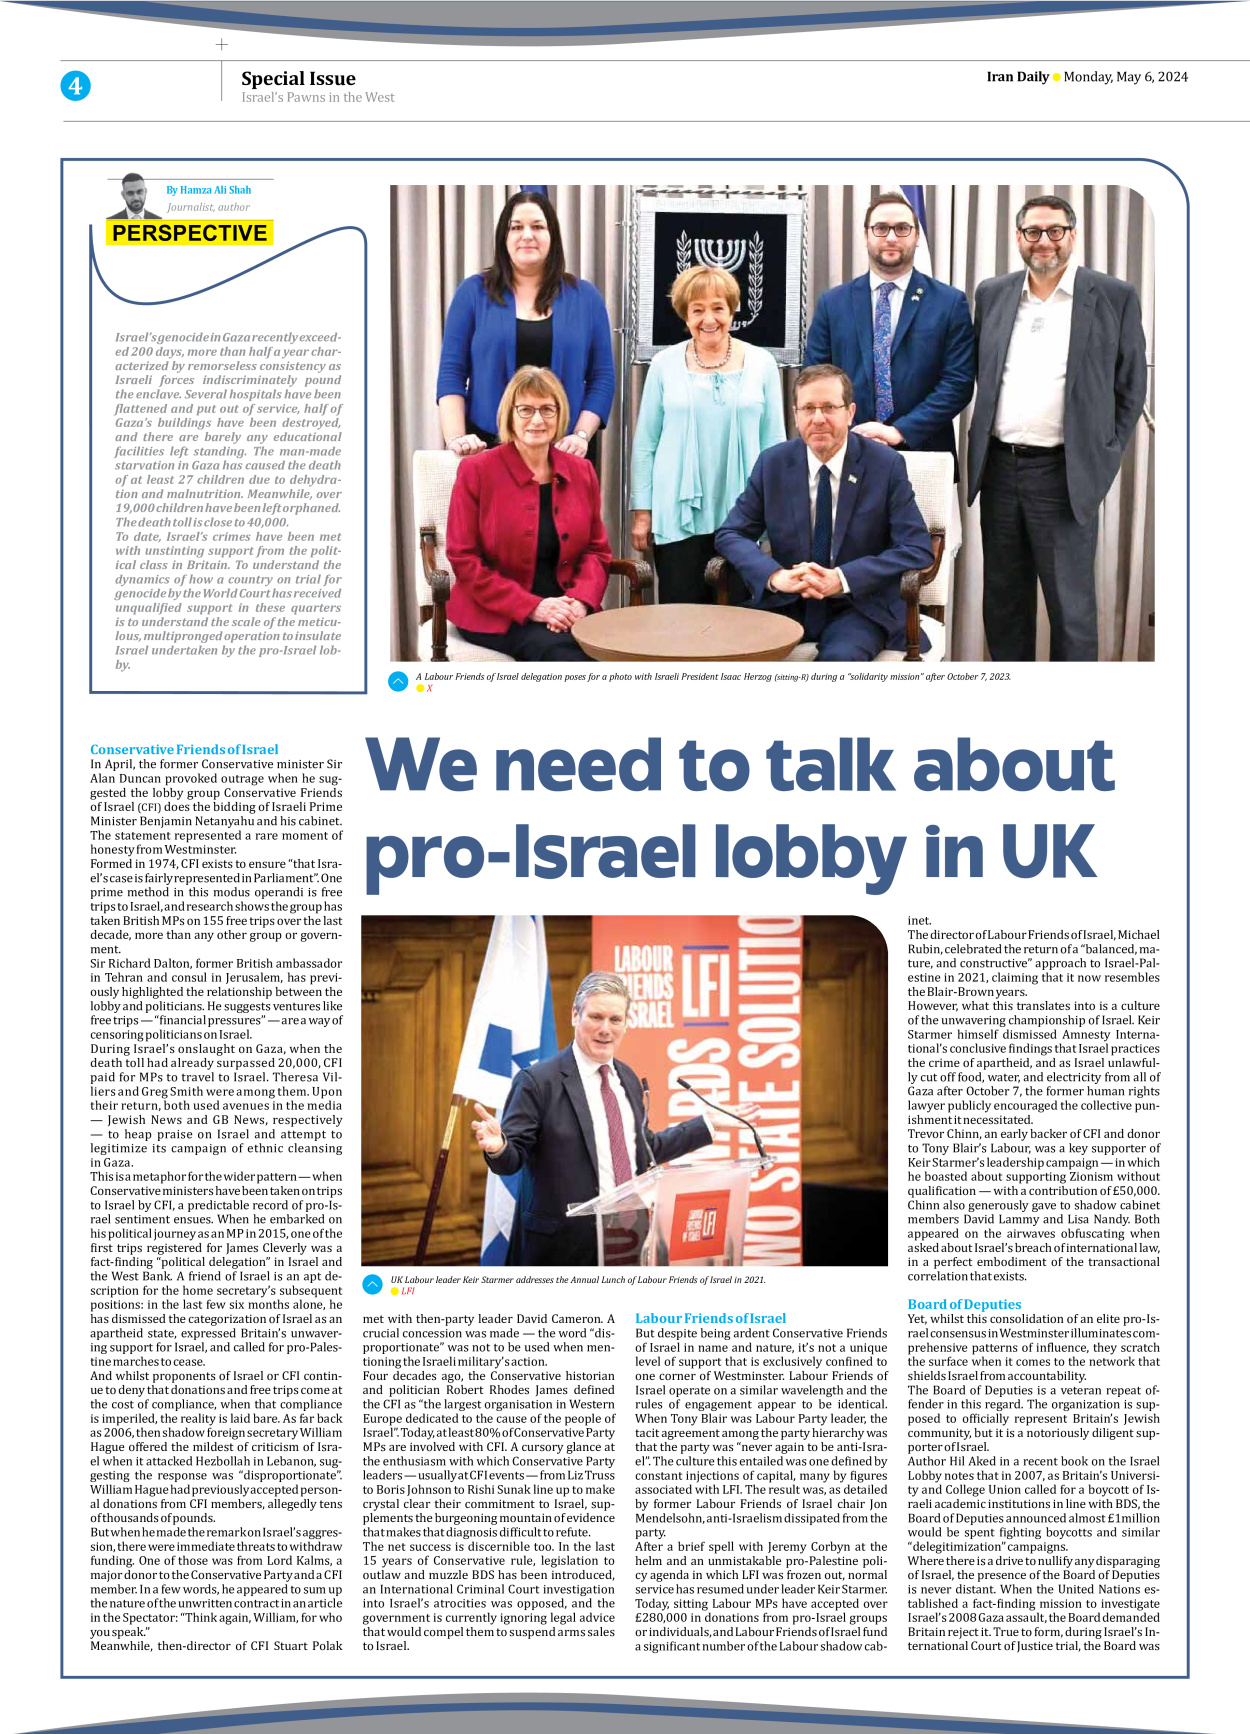 Iran Daily - Number Seven Thousand Five Hundred and Fifty - 06 May 2024 - Page 4